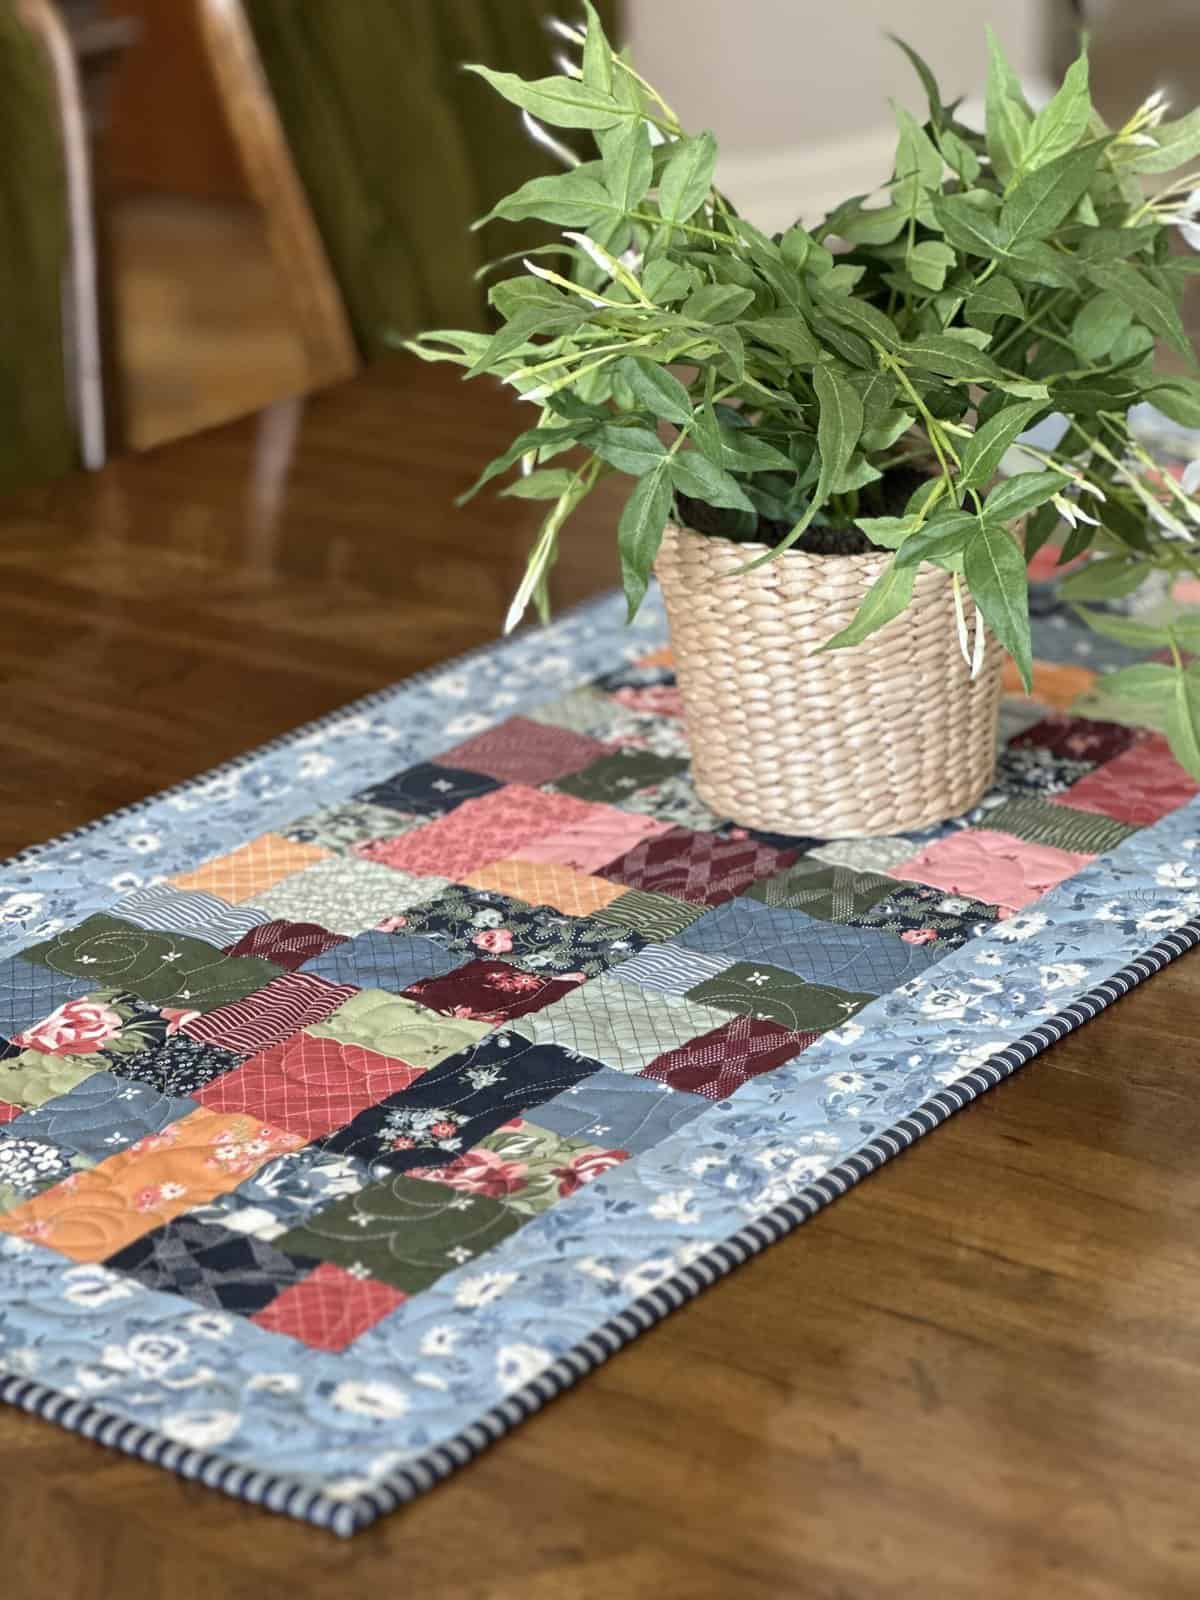 Quilted Patchwork Table Runner